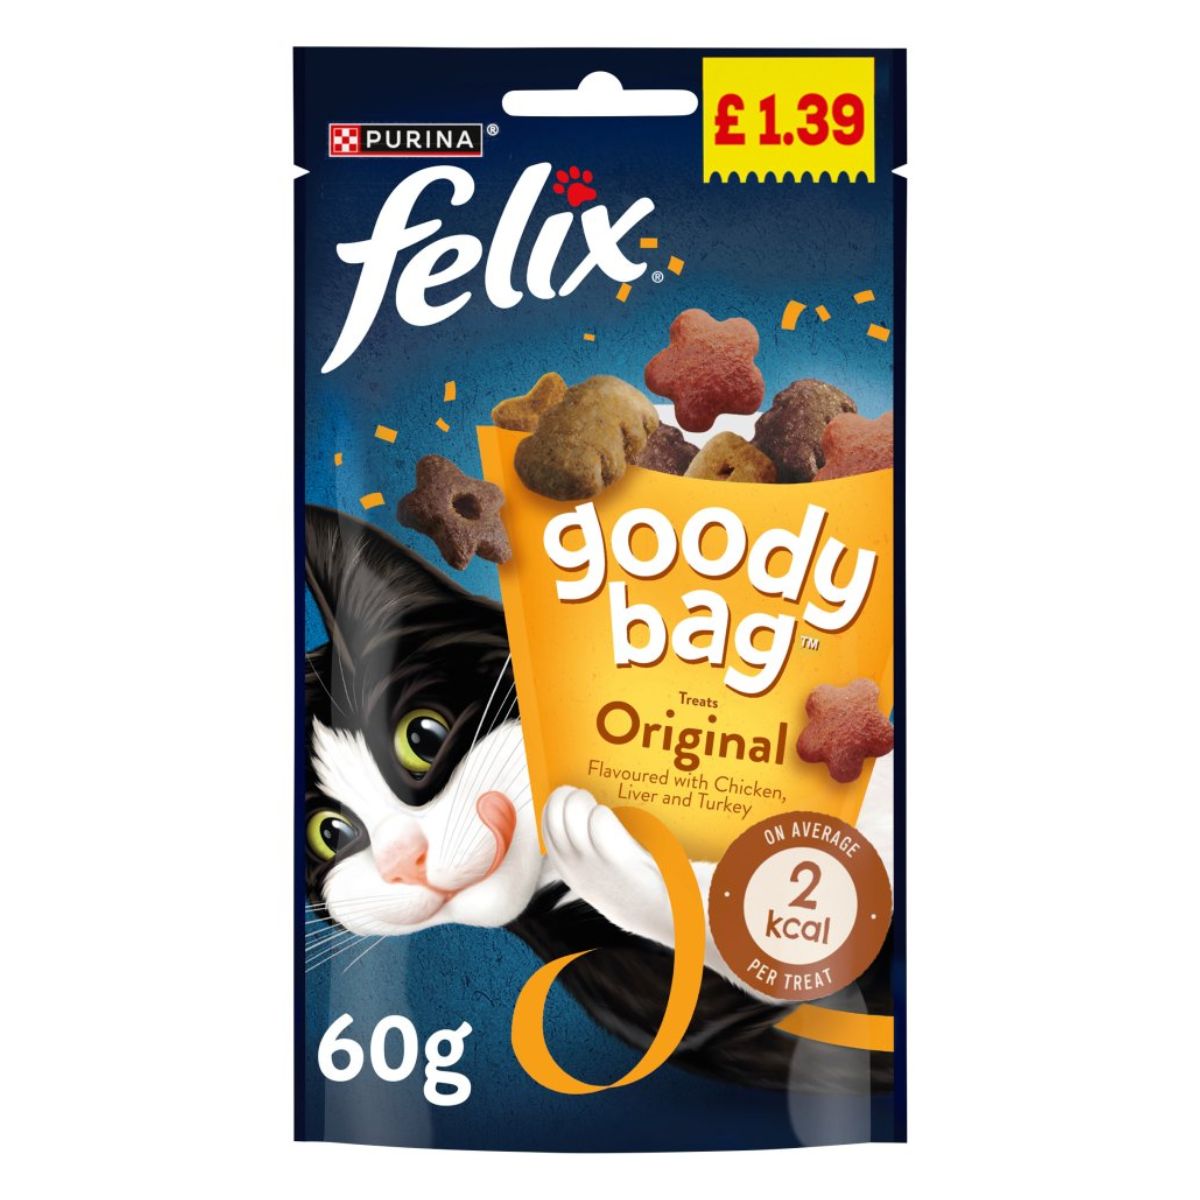 Package of Purina - Felix Goody Bag Original Chicken Liver and Turkey Cat Treats - 60g, displayed at £1.39, featuring a playful black and white cat graphic. This product is highlighted as protein-rich.